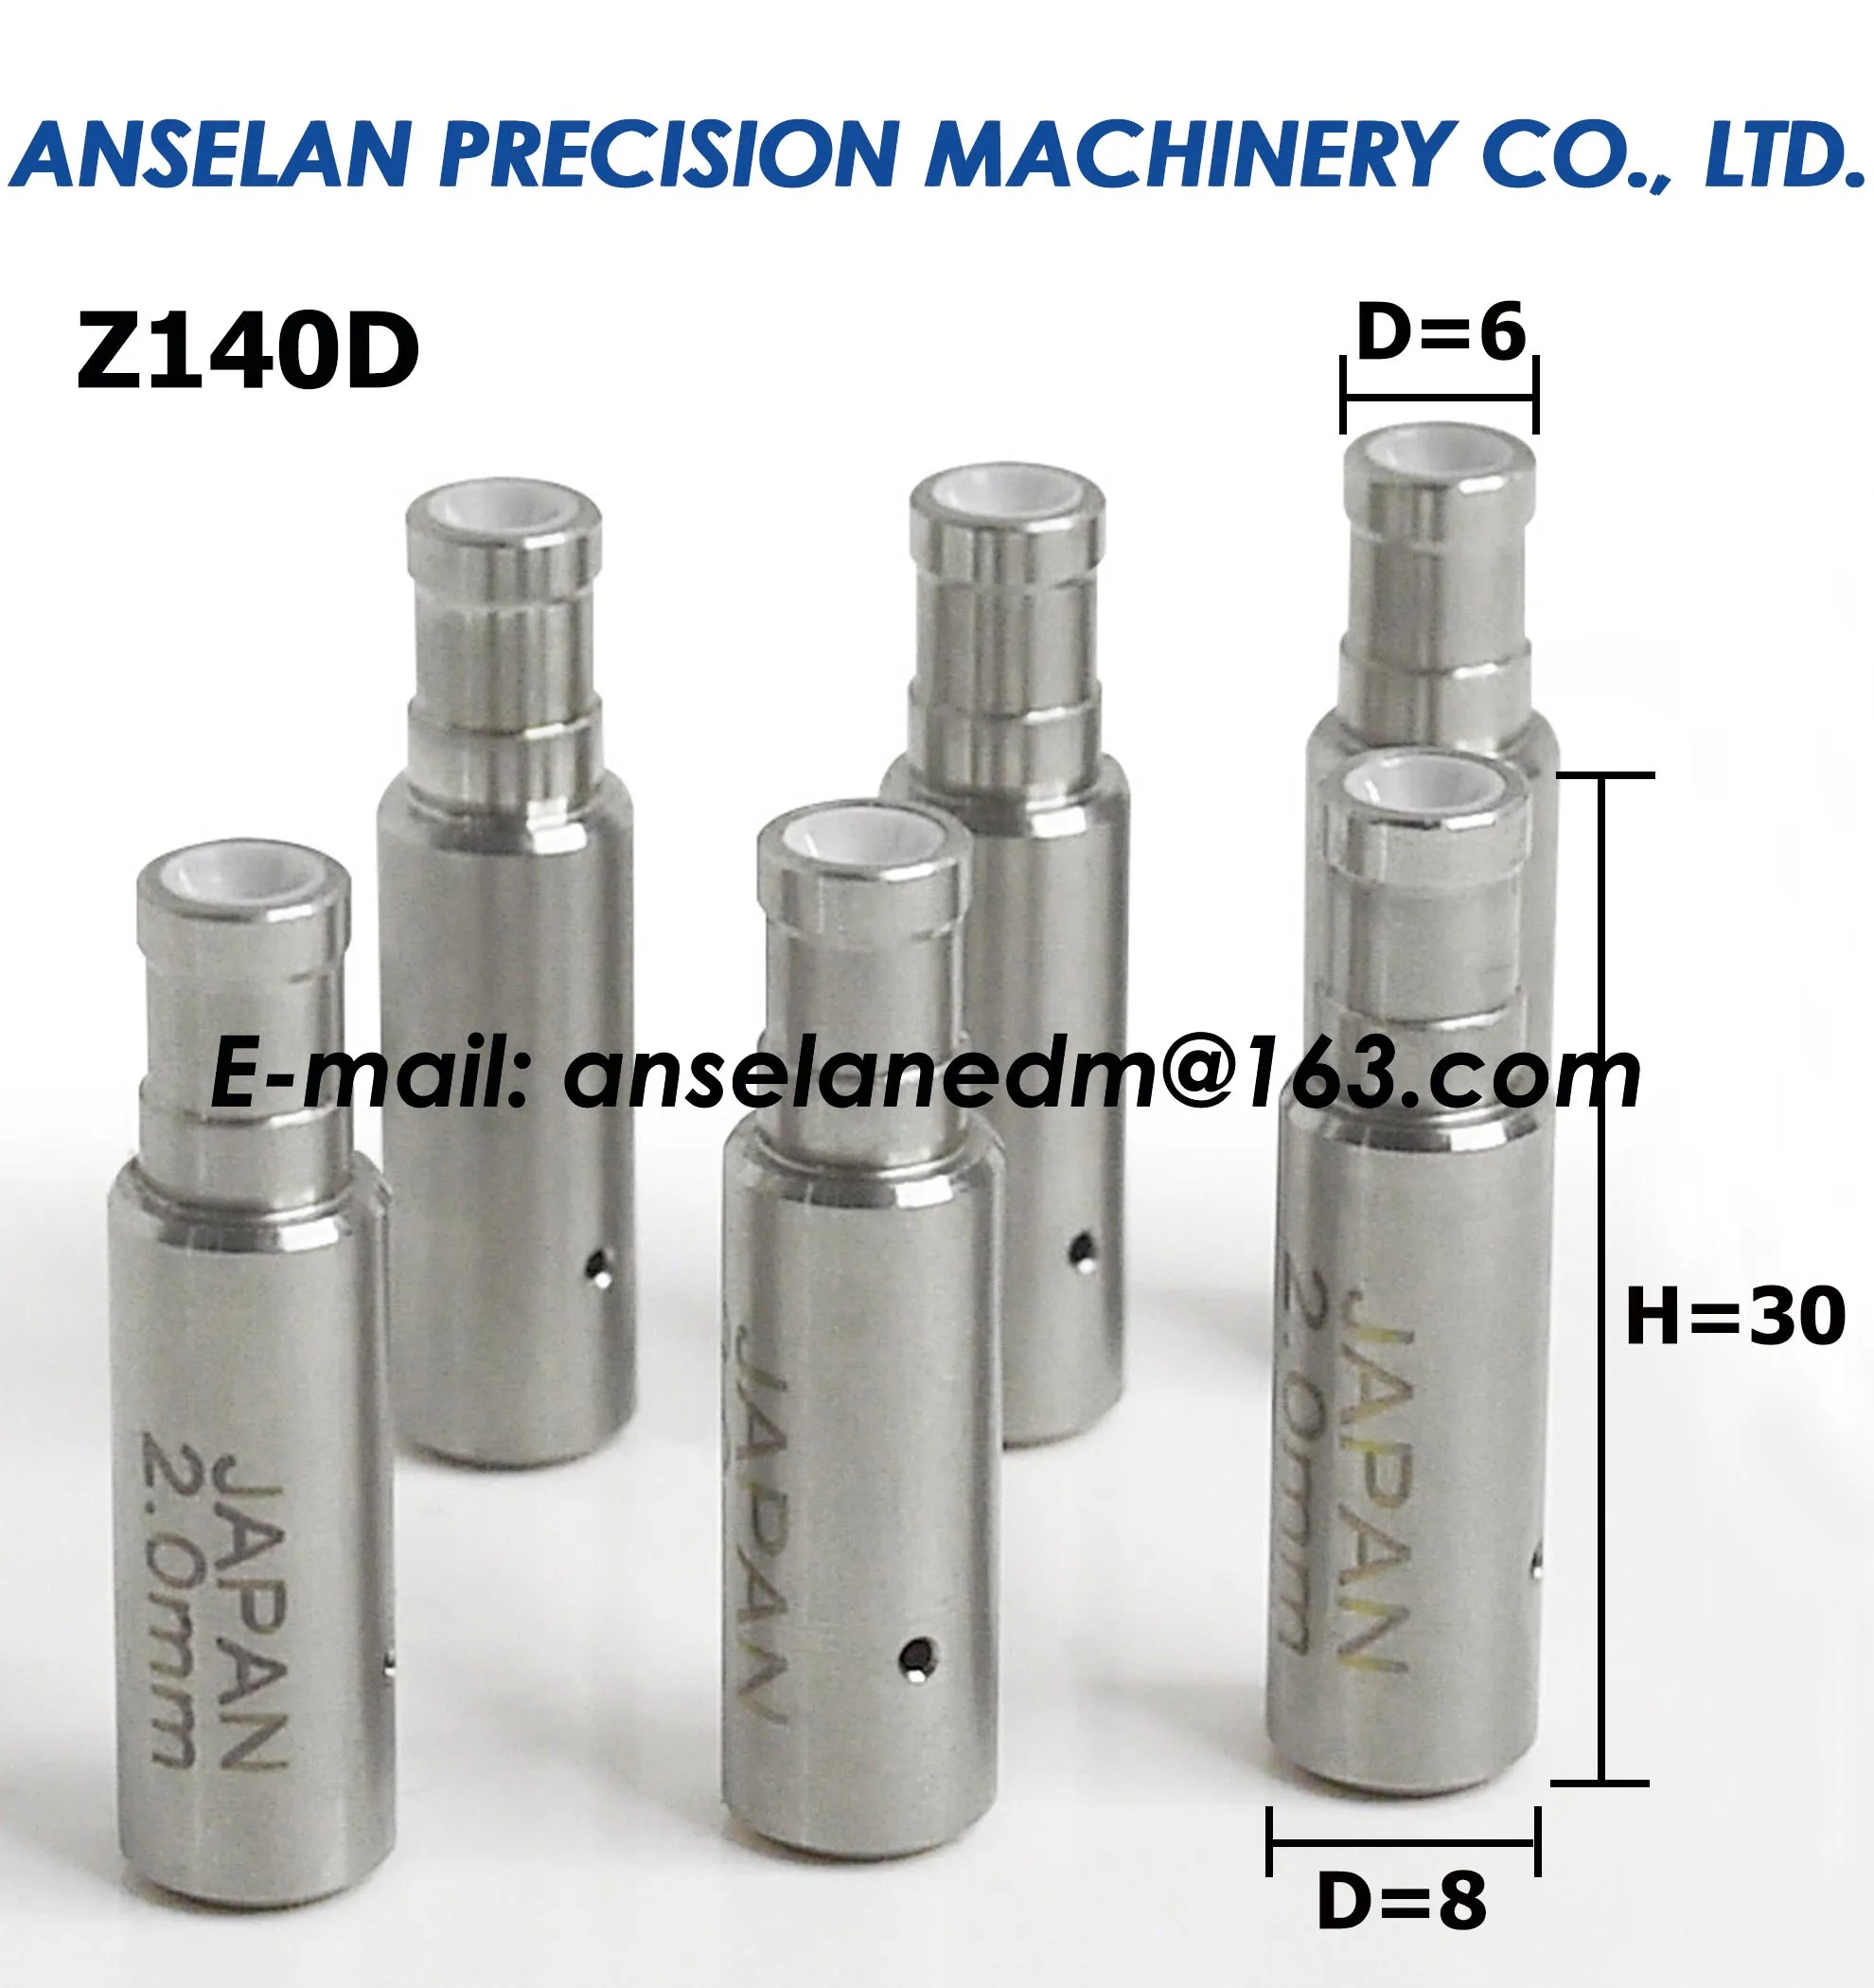 

Ø0.15mm Z140D Ceramic Pipe Guide for Taiwan brands of edm drilling machine, ELECTRODE TUBING GUIDE, EDM DOUBLE CERAMIC GUIDE